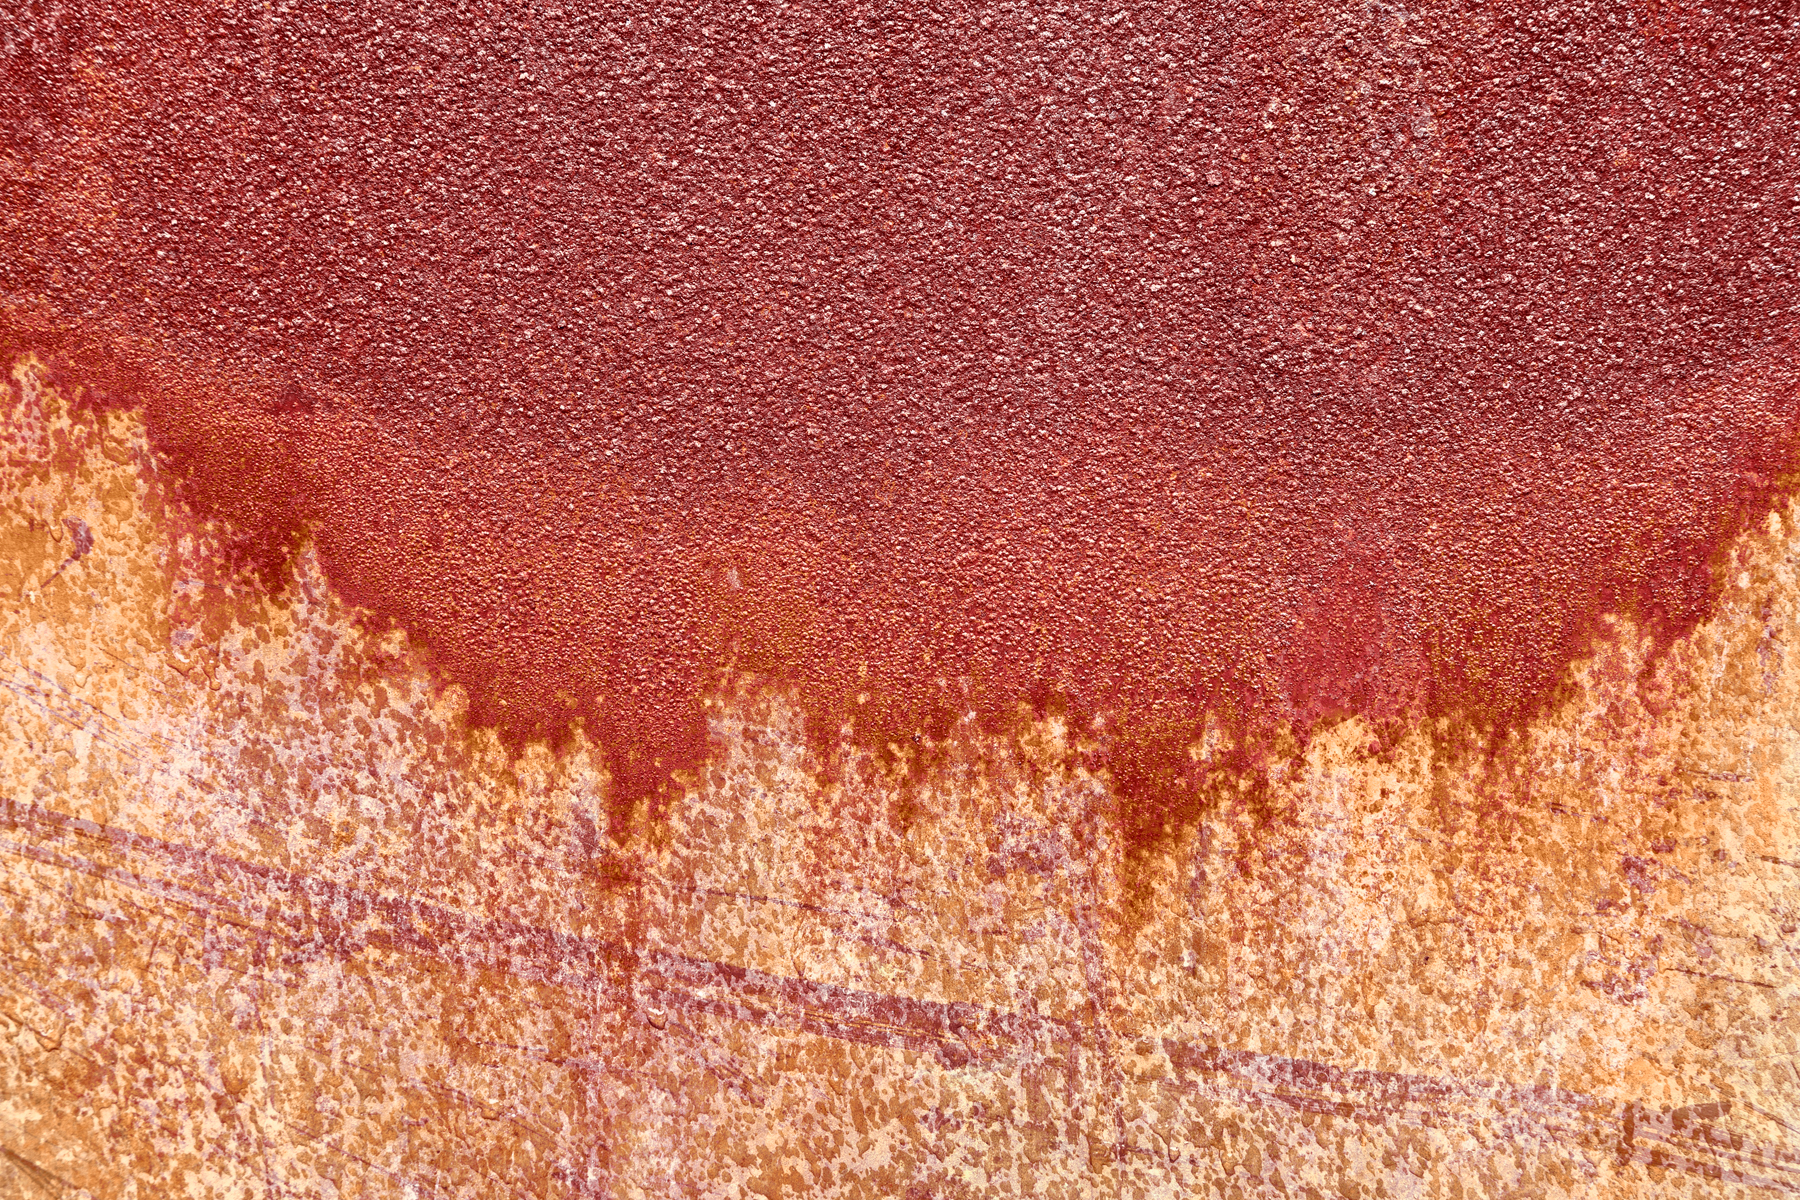 Rusty Grunge Texture - Blood Red HDR